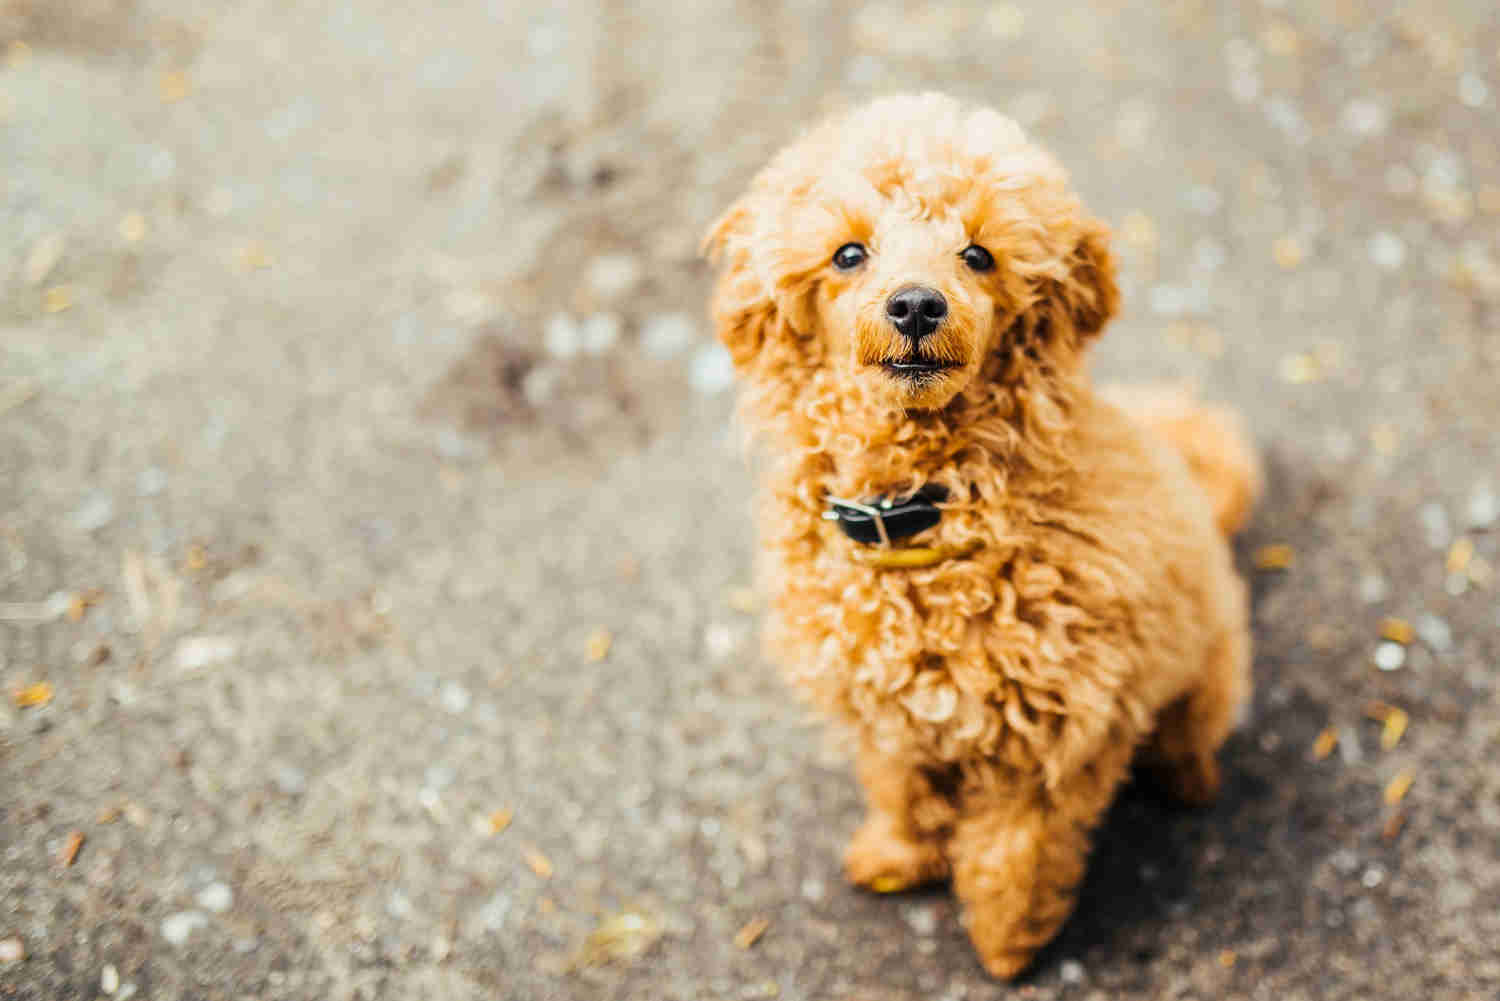 How can owners manage and treat cardiac conditions in Poodles?